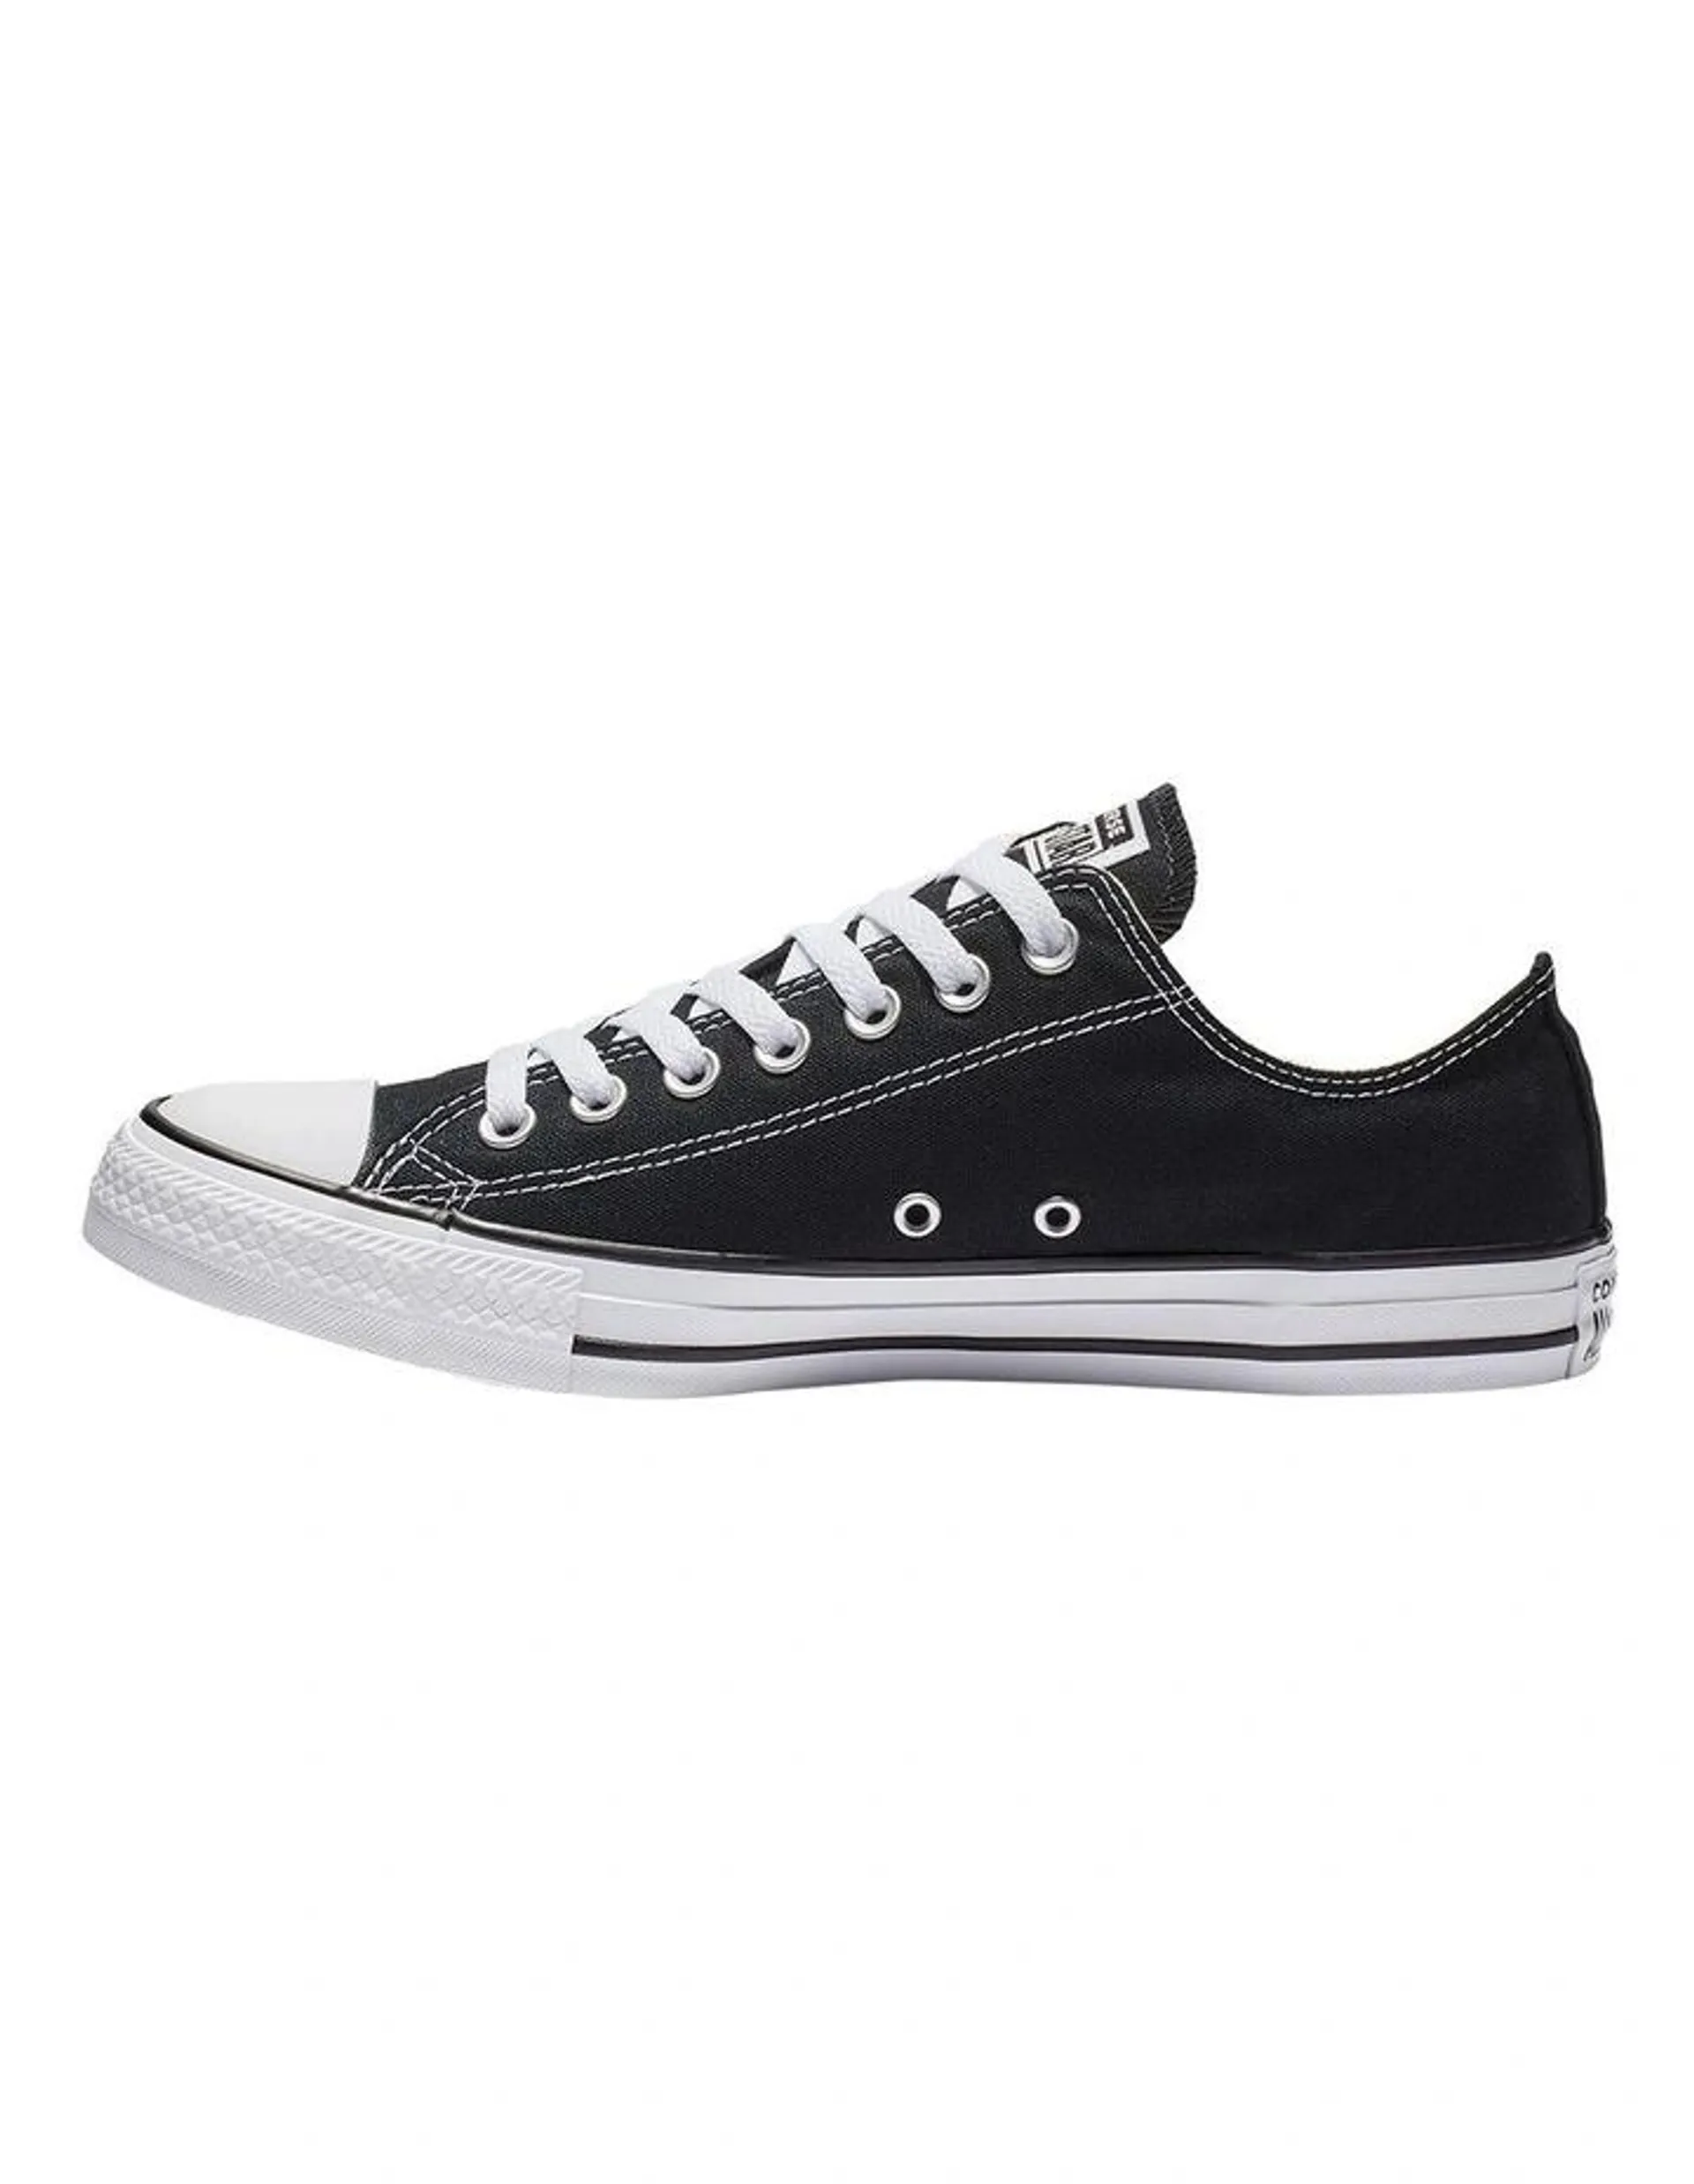 Chuck Taylor All Star Black Canvas Low Top Sneaker